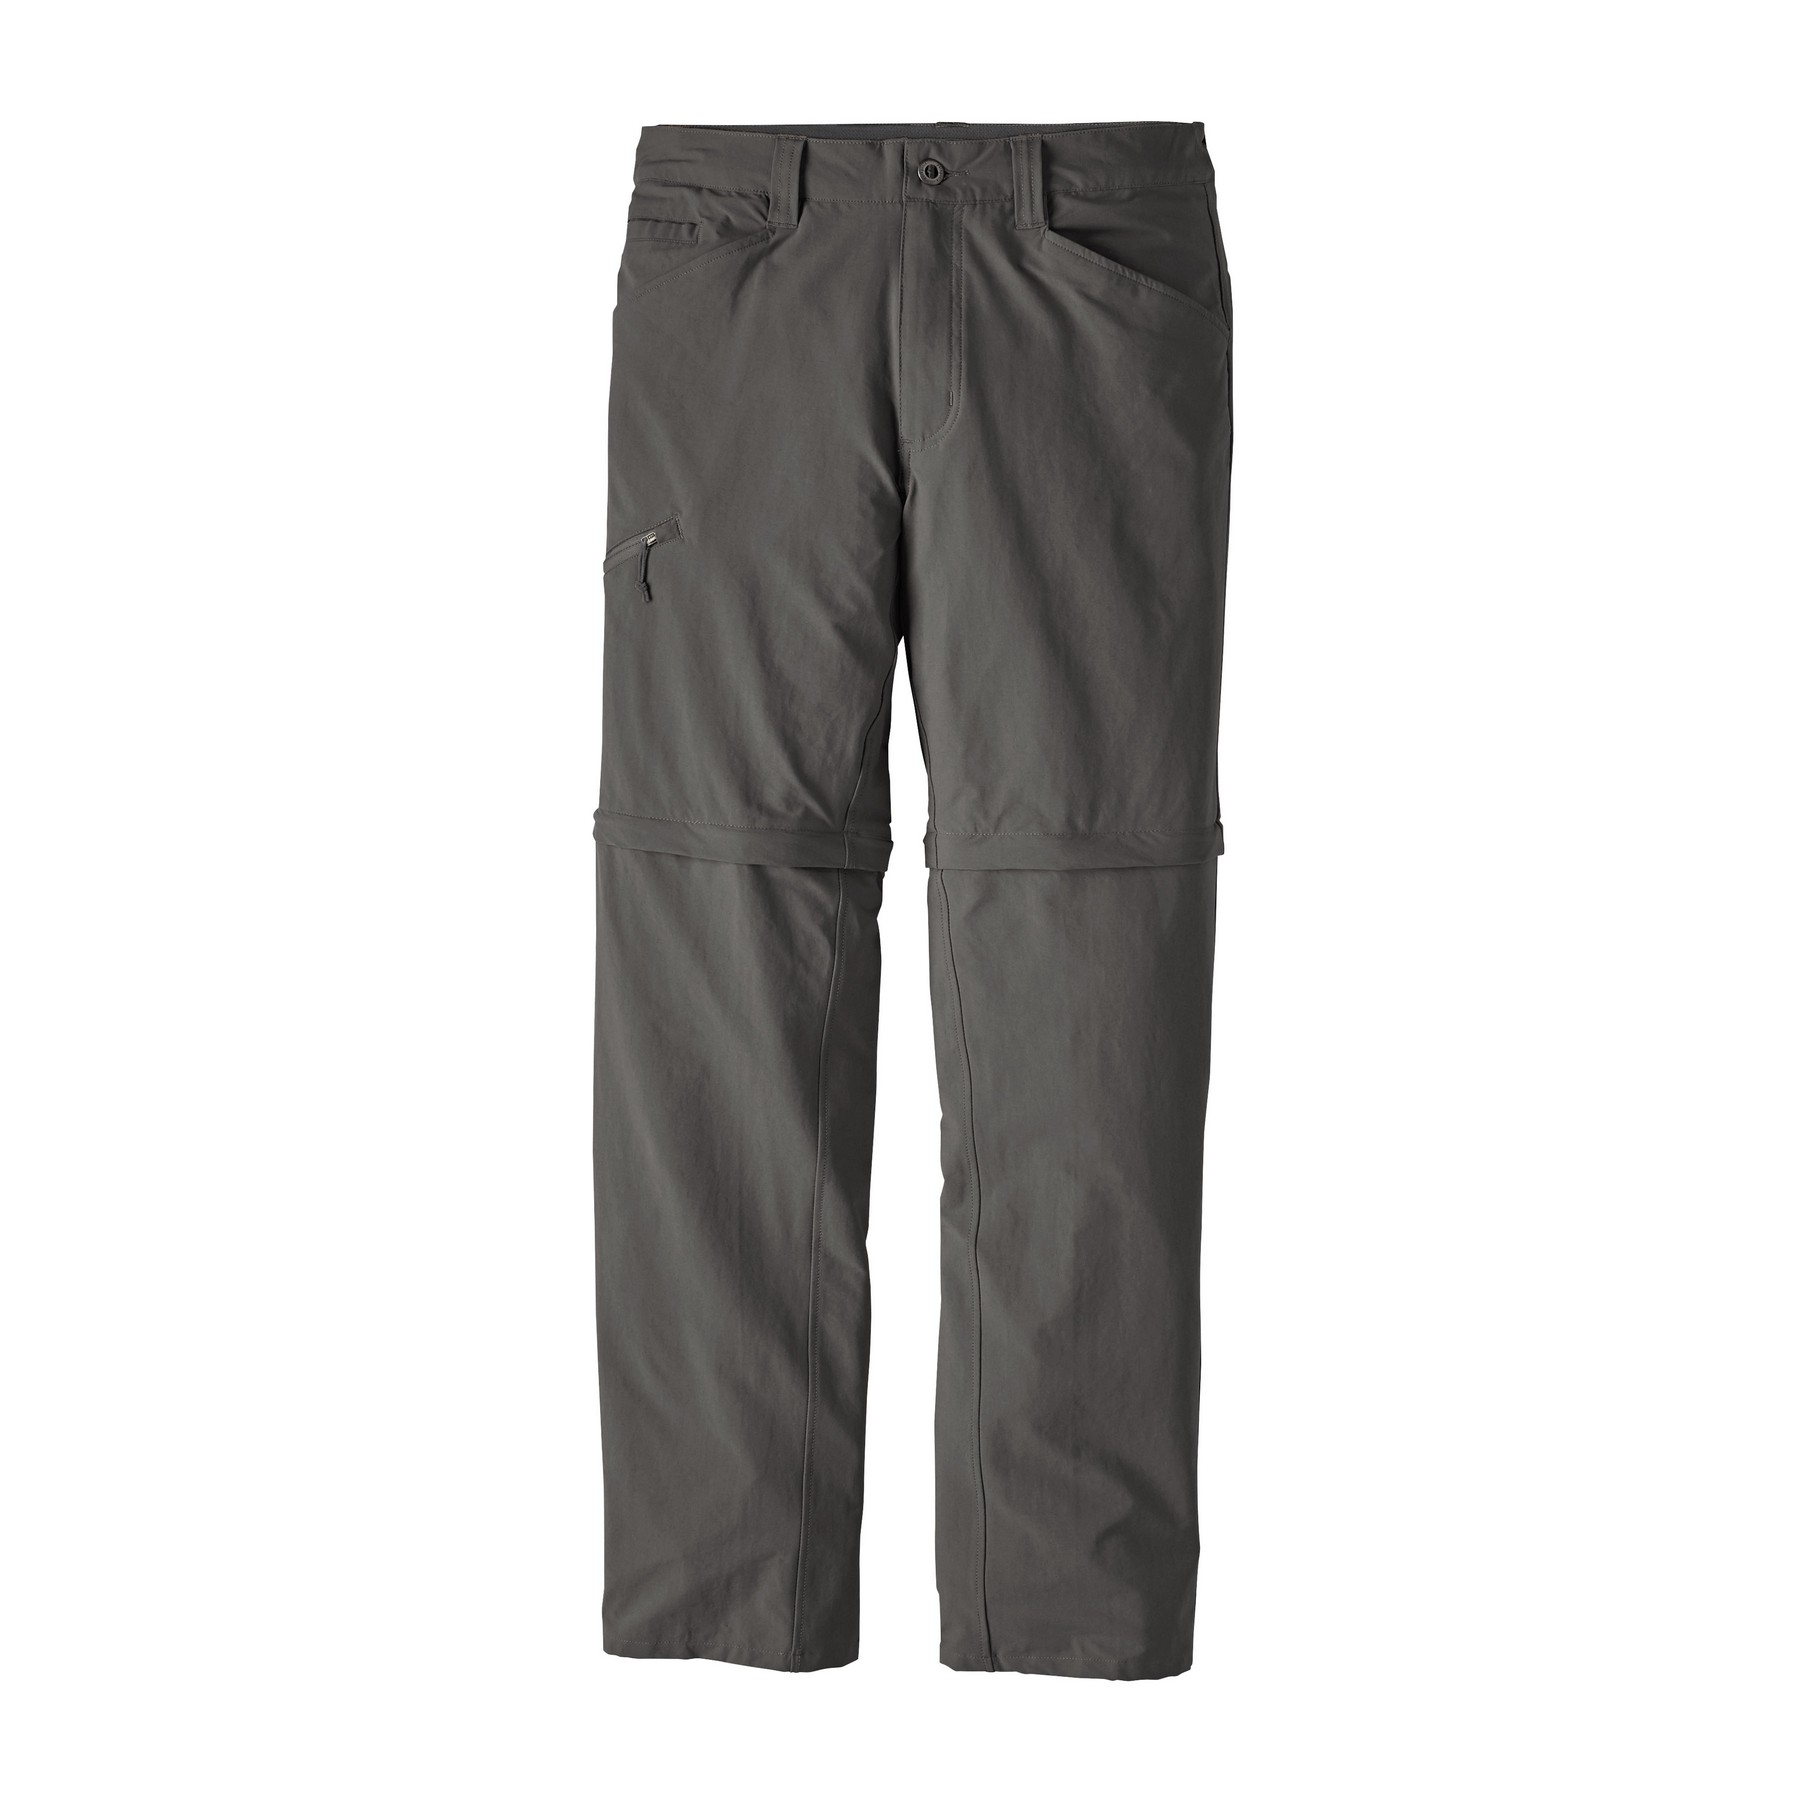 Patagonia "Ms Quandary Convertible Pants" - forge grey